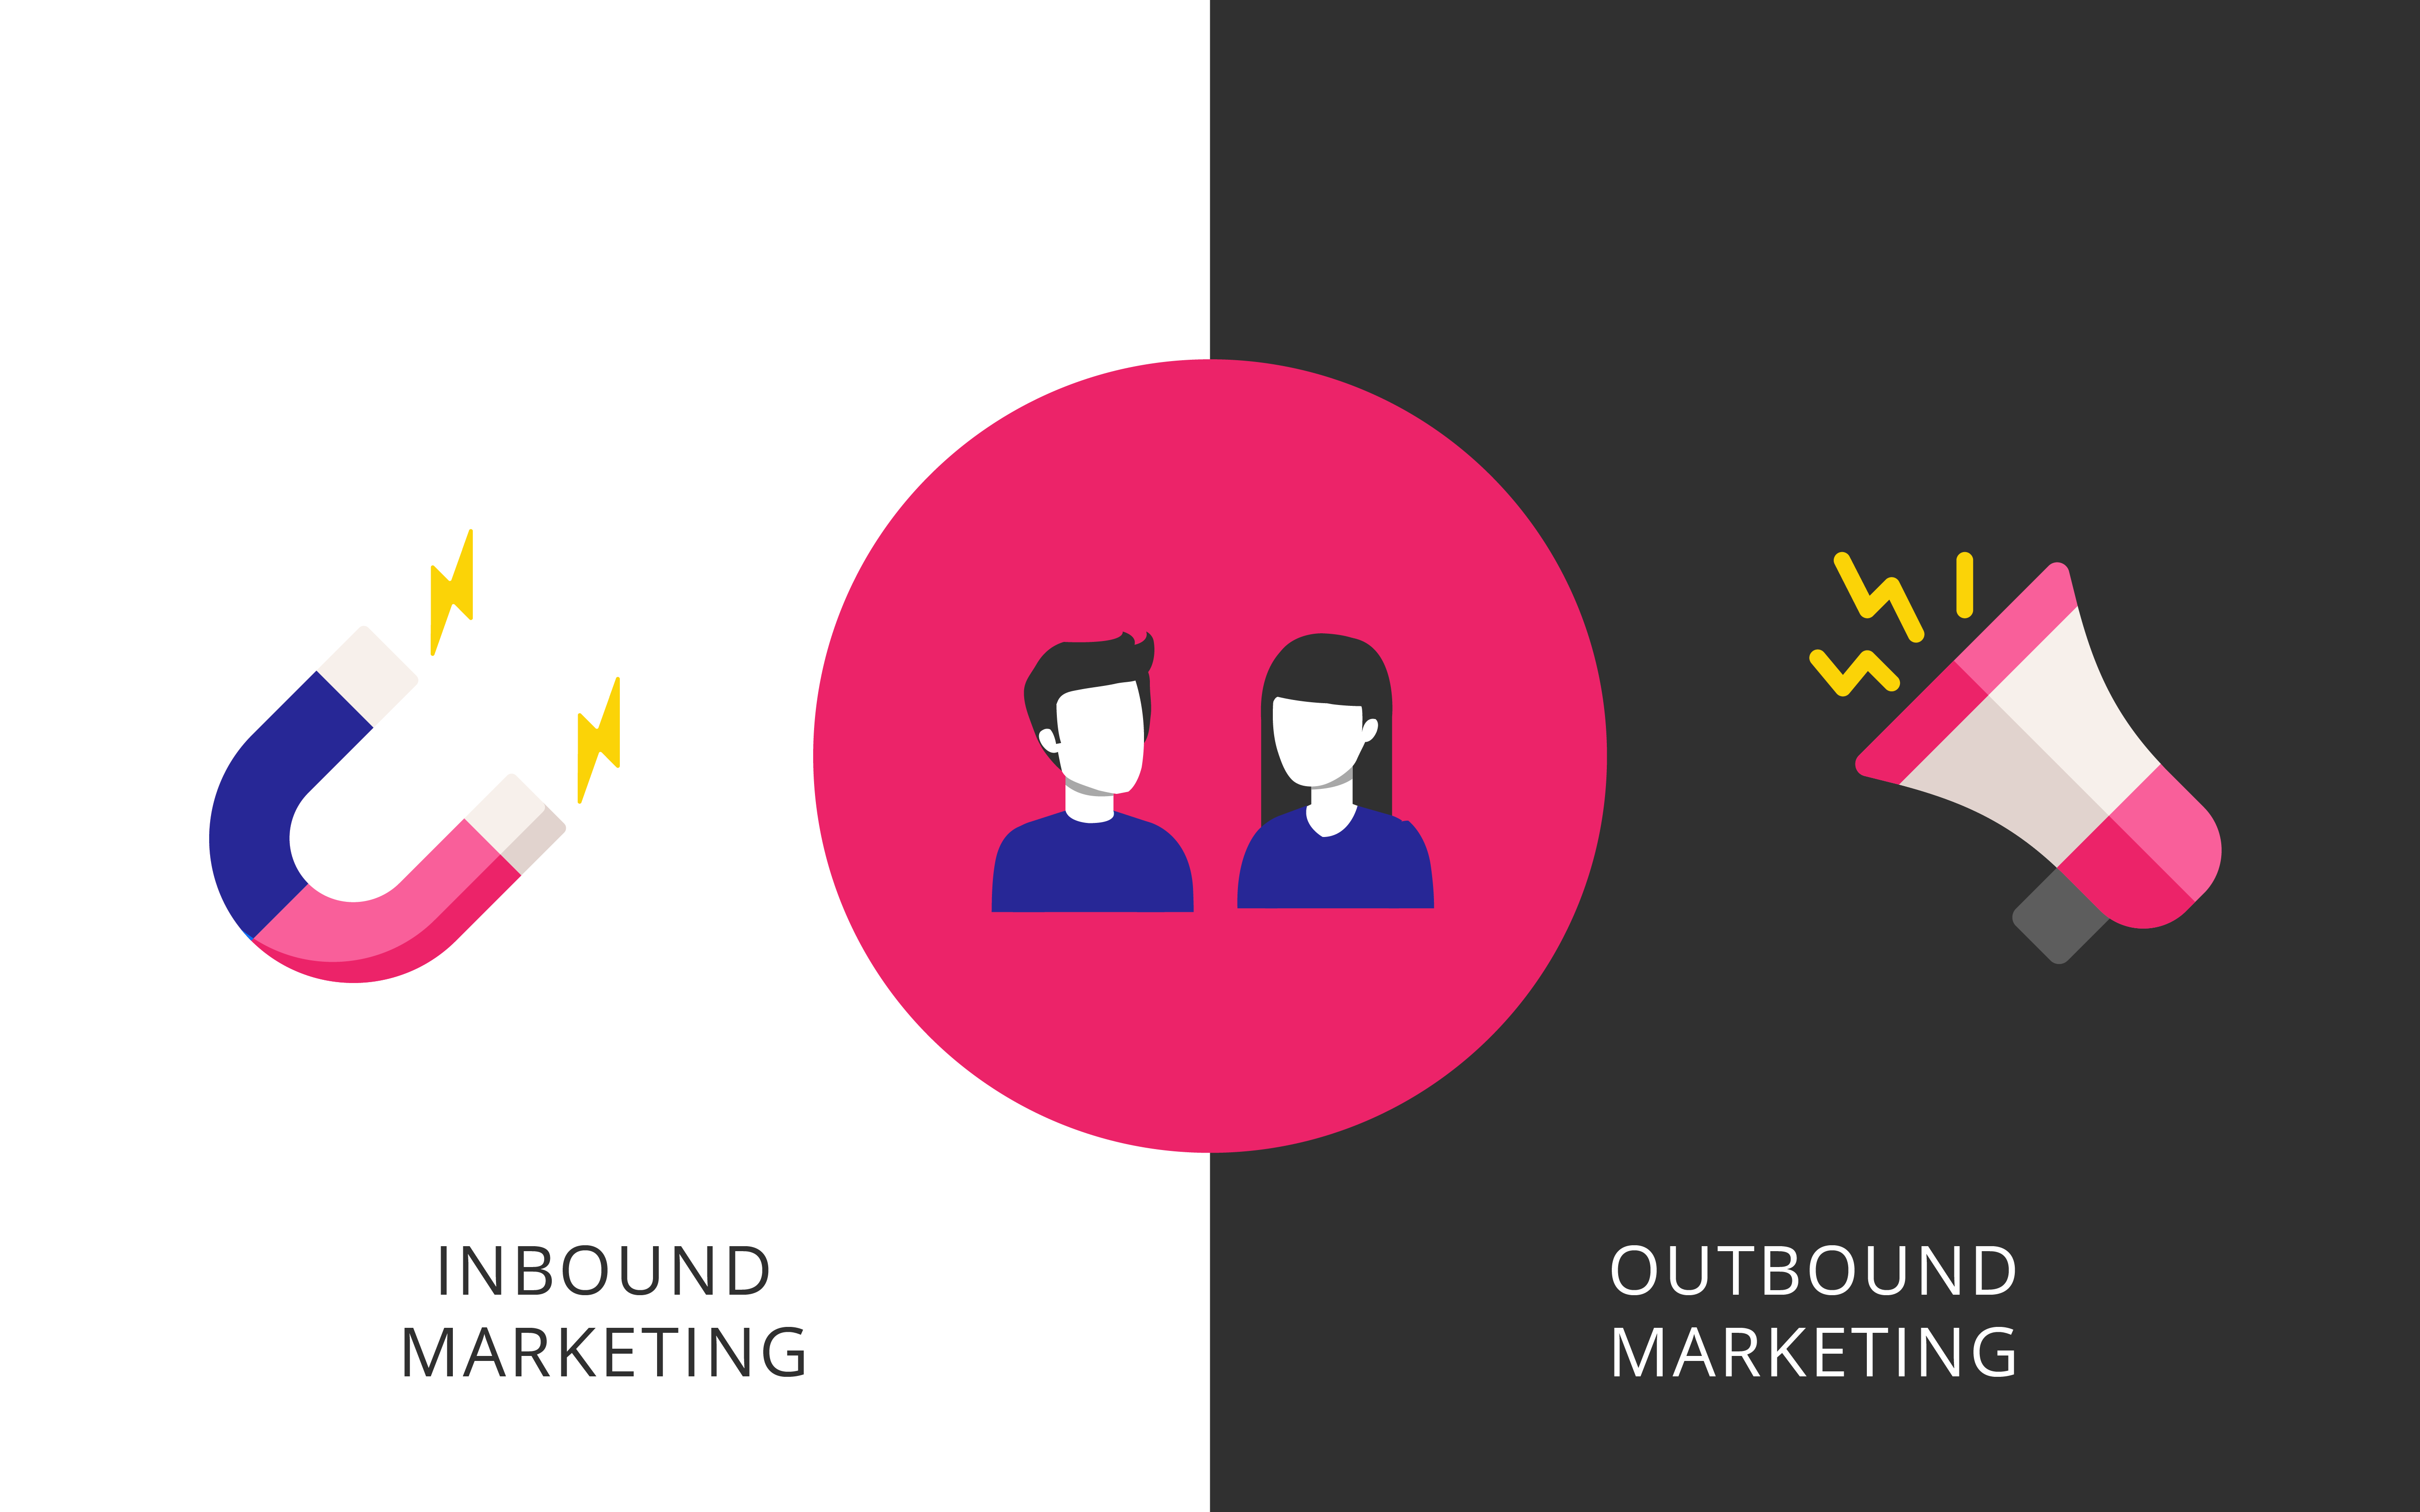 Who Can Use Inbound Marketing?